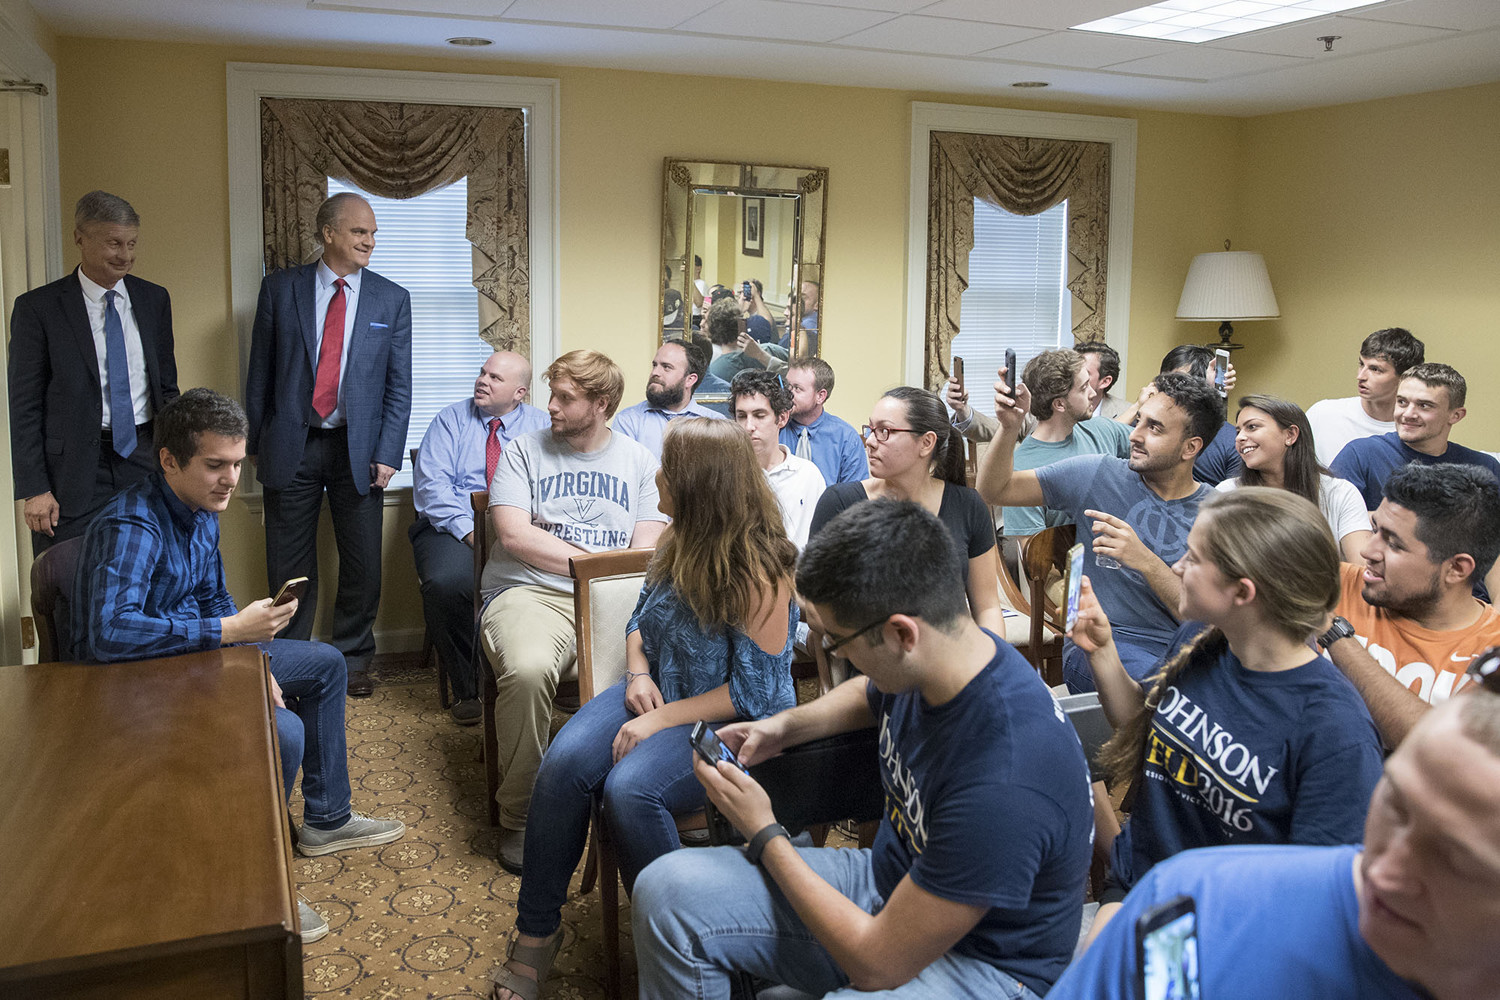 Presidential candidate Gary Johnson took time to greet students before appearing on Monday’s edition of American Forum.